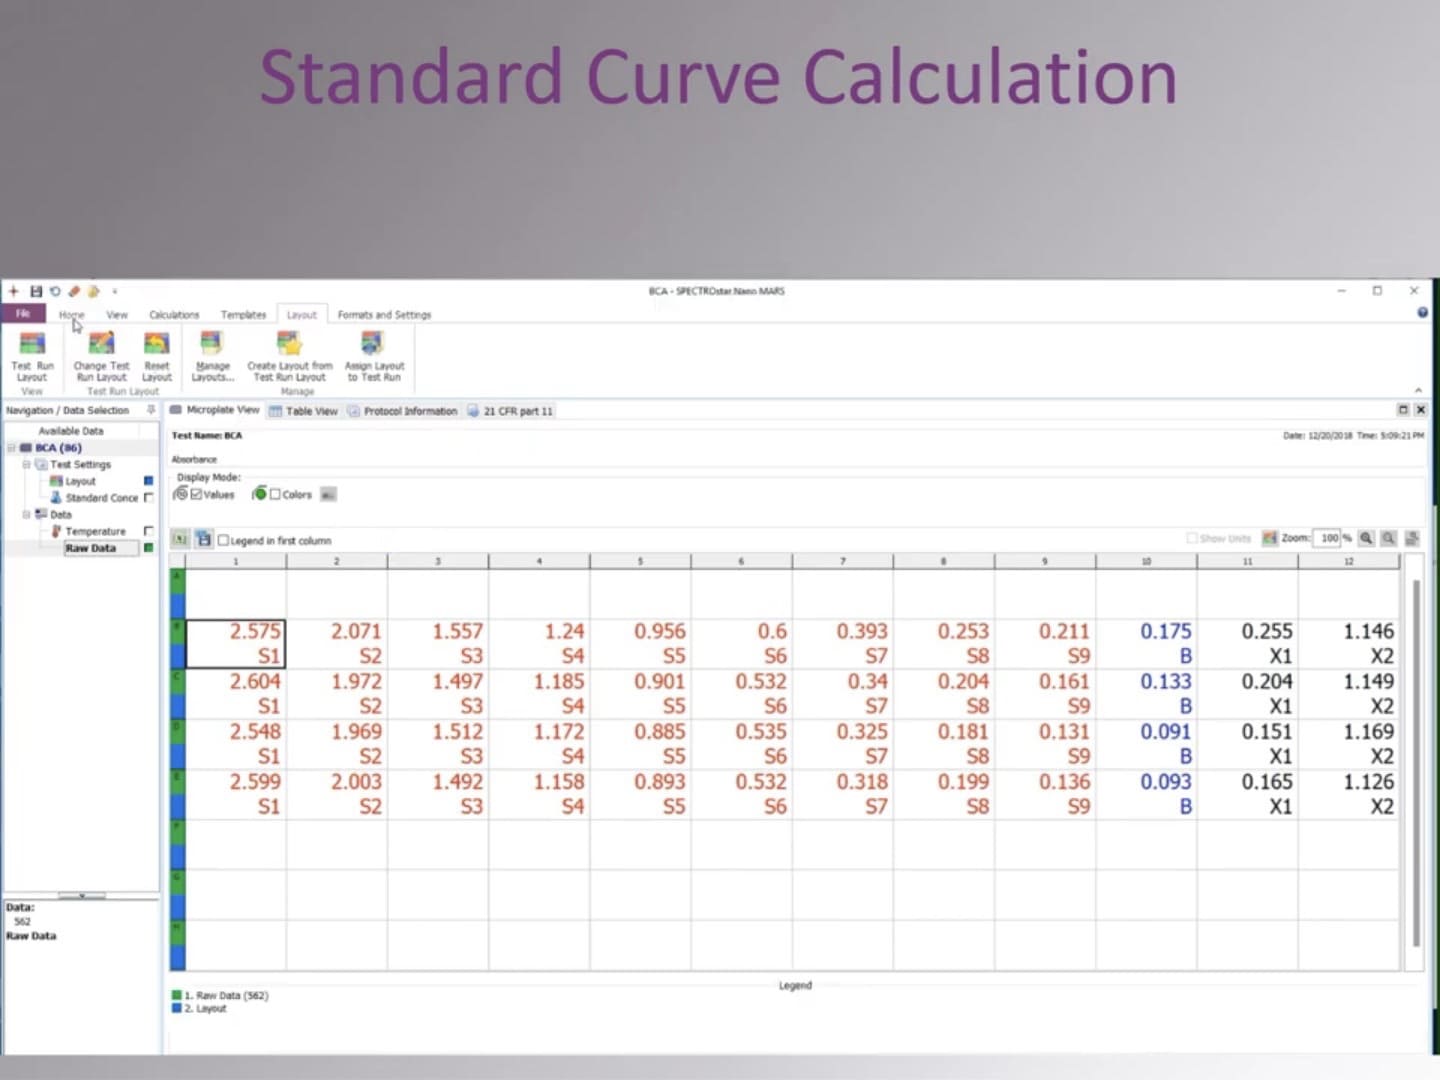 Video MARS Data Analysis Changing Layouts & Creating a Standard Curve